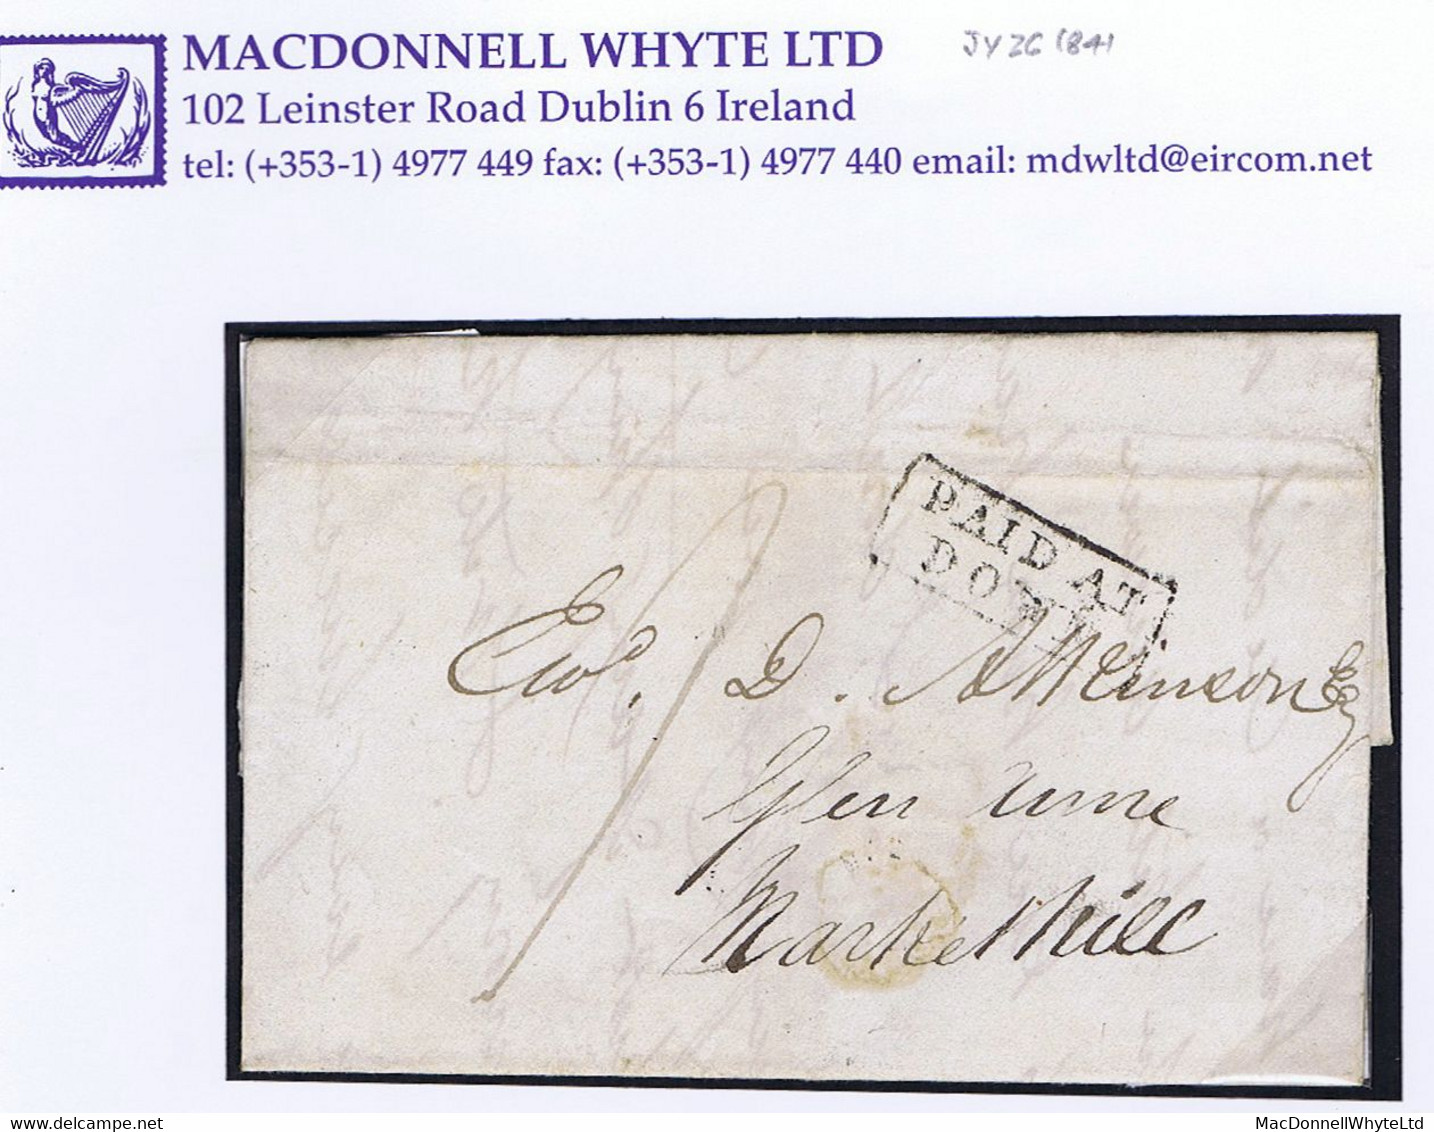 Ireland Down Uniform Penny Post 1841 Letter To Markethill Paid "1" Boxed PAID AT/DOWN, Cds DOWN JY 26 1841 - Prefilatelia